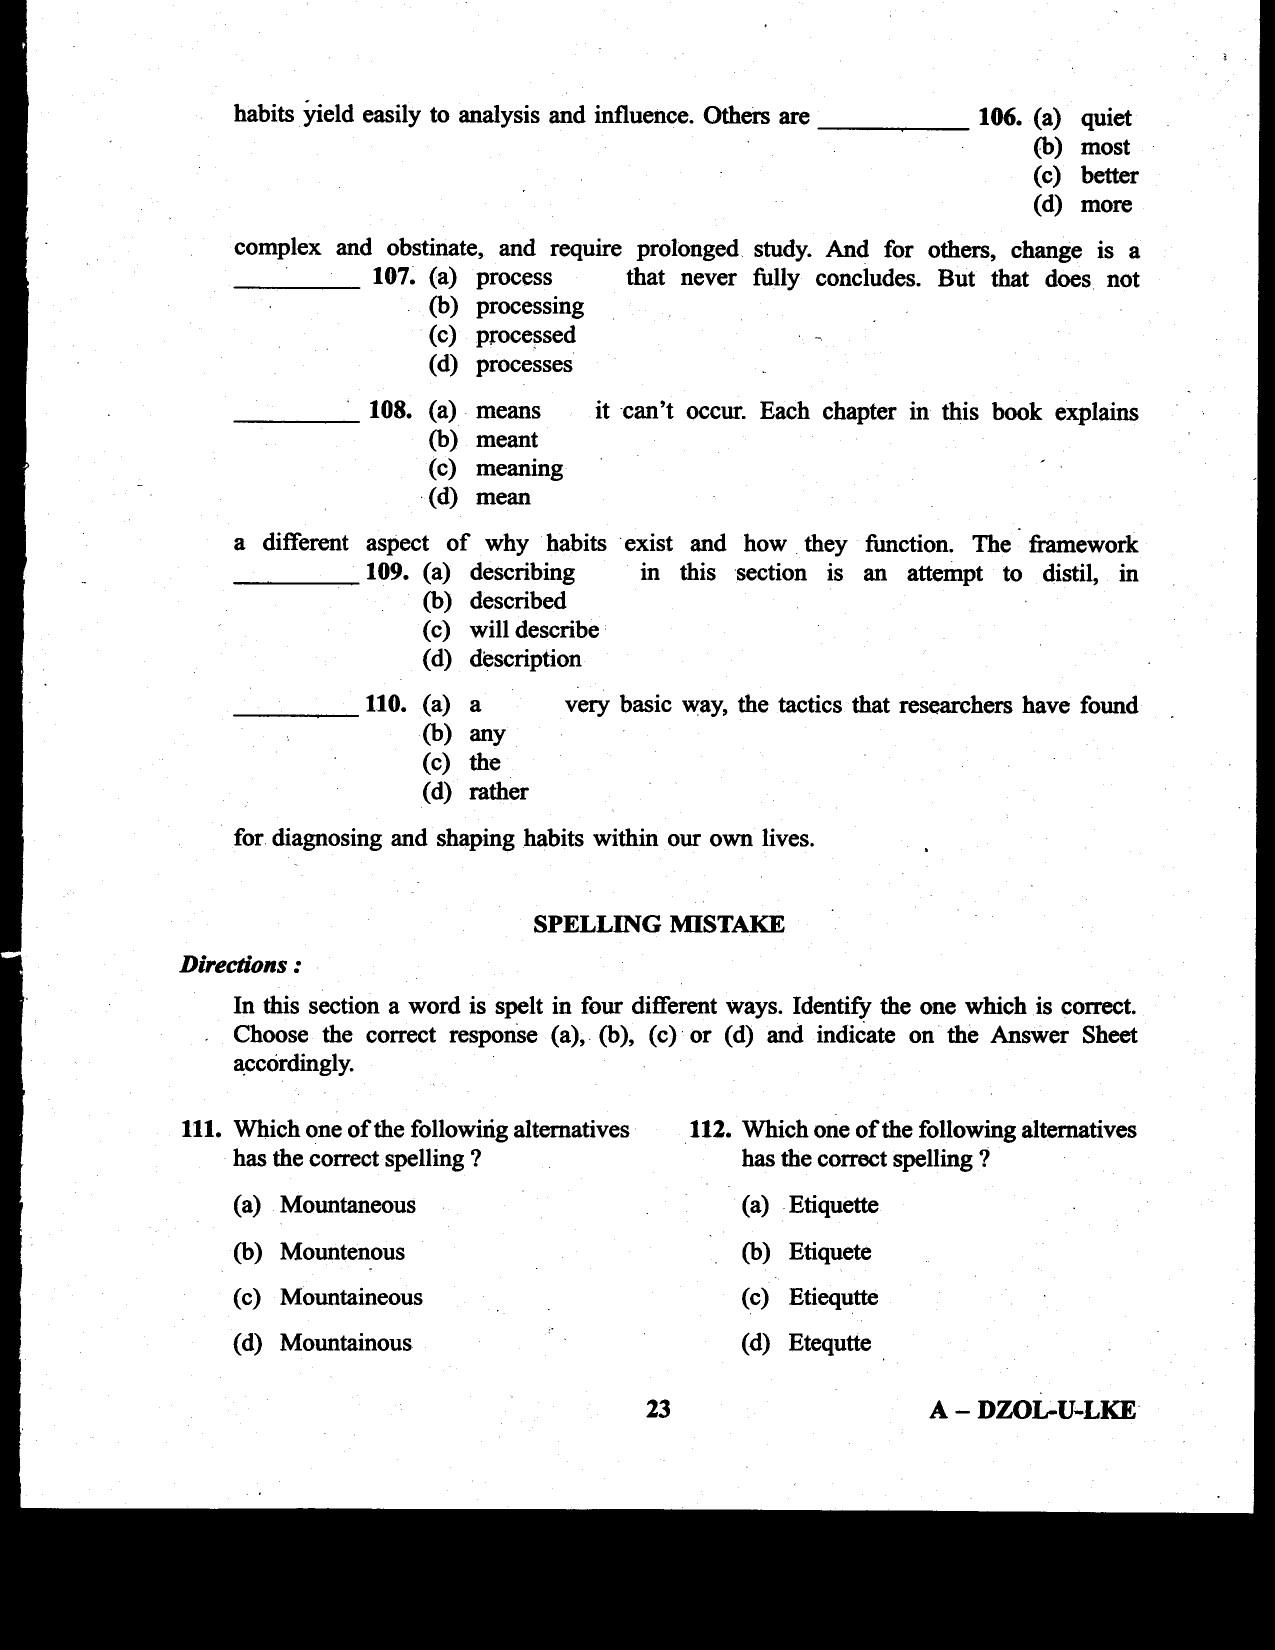 CDS II Examination 2020 English Question Paper - Image 23